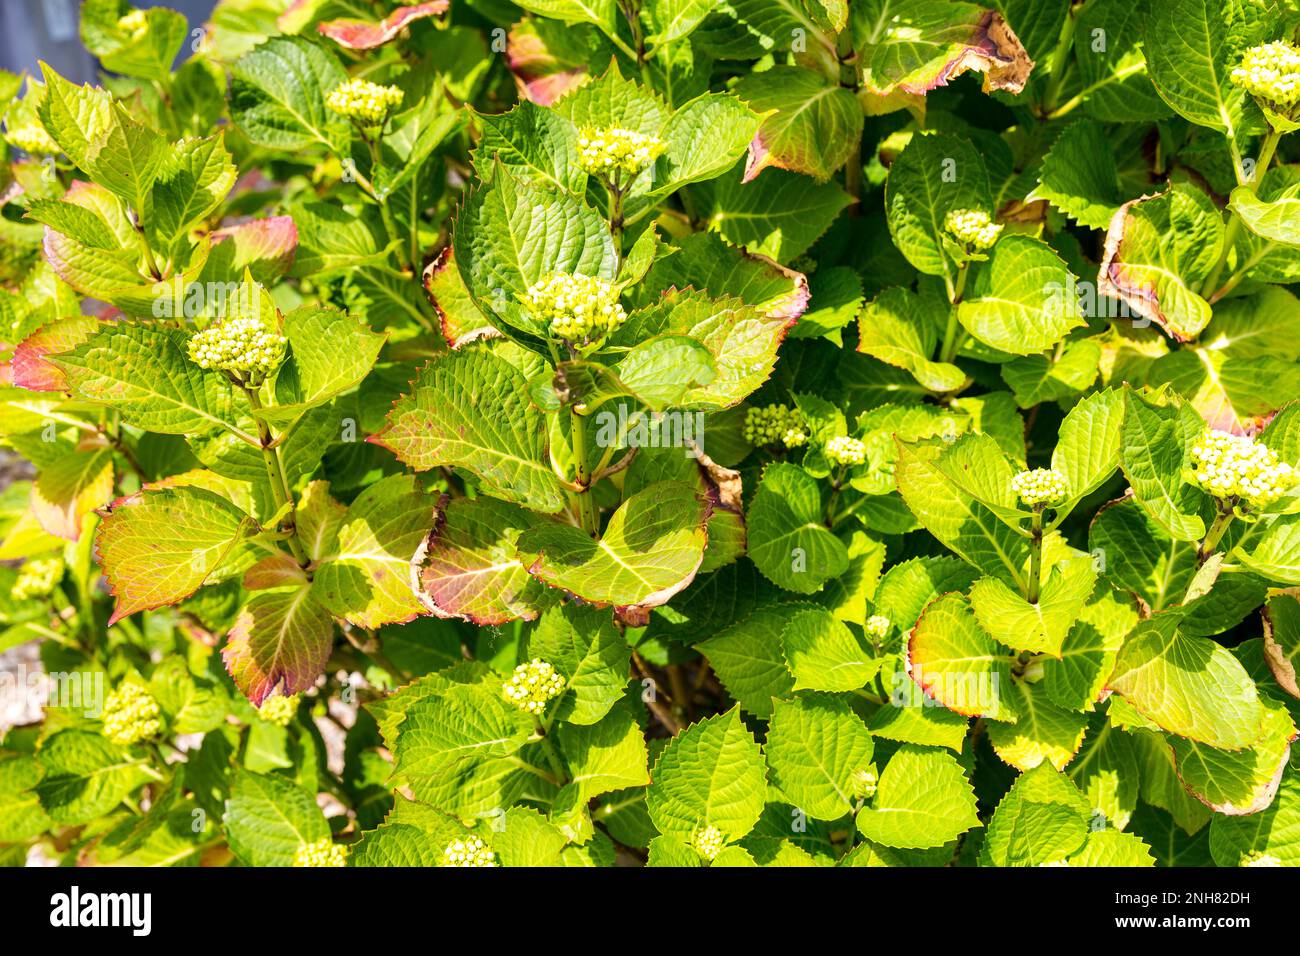 Close-up leave of hortensia infected by cercospora in garden. Tan spots with reddish bown halos develop on leaves. Need water to keep off moisture. Ap Stock Photo